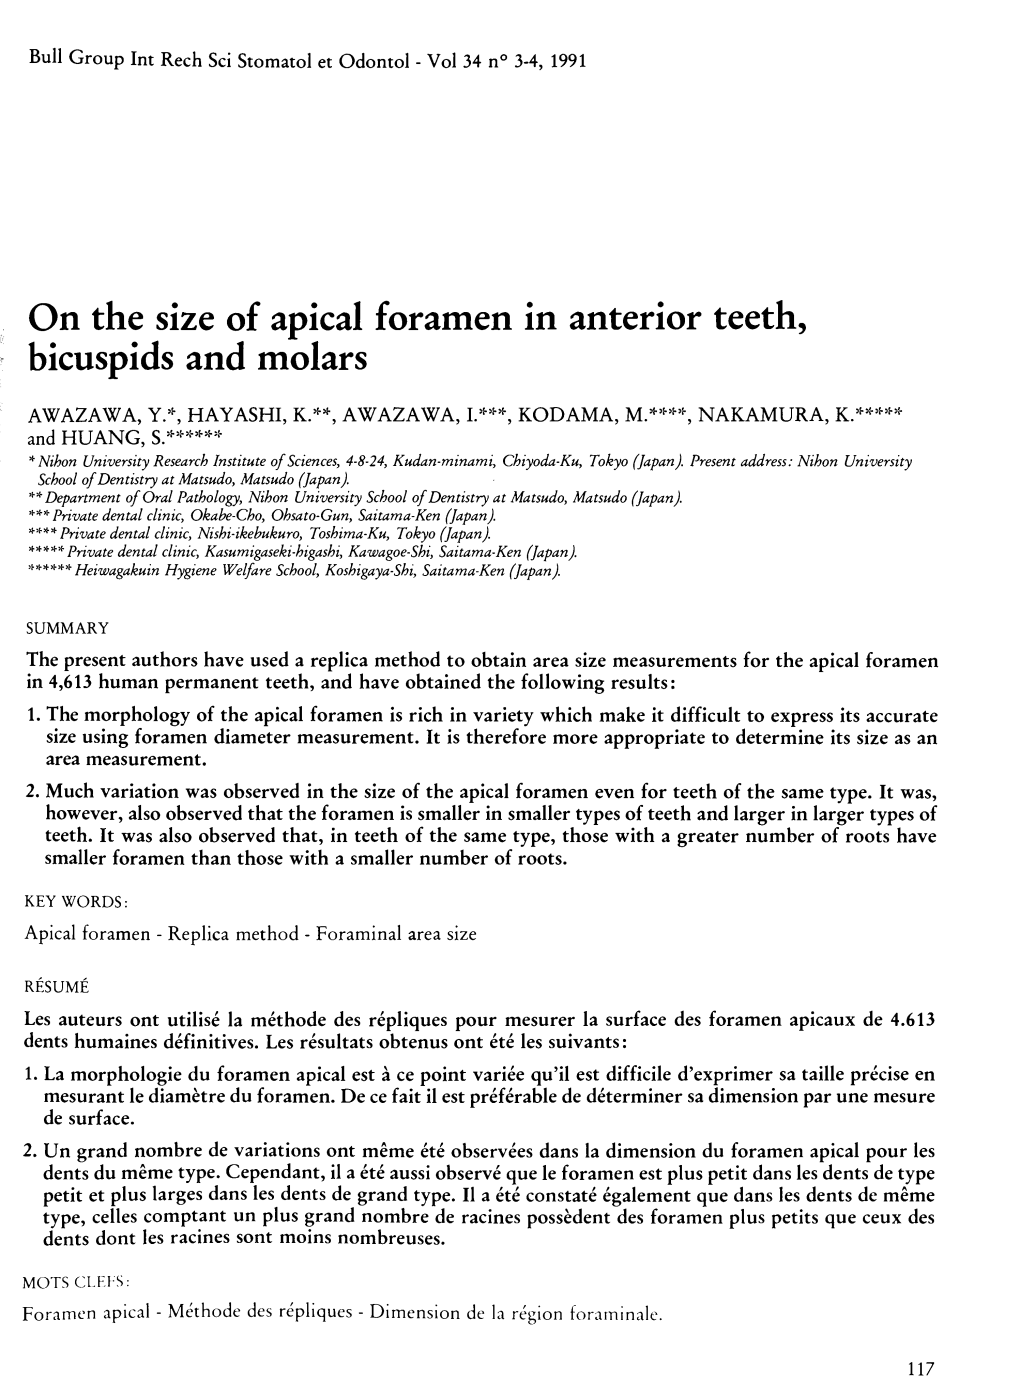 On the Size of Apical Foramen Teeth, Bicuspids and Molars